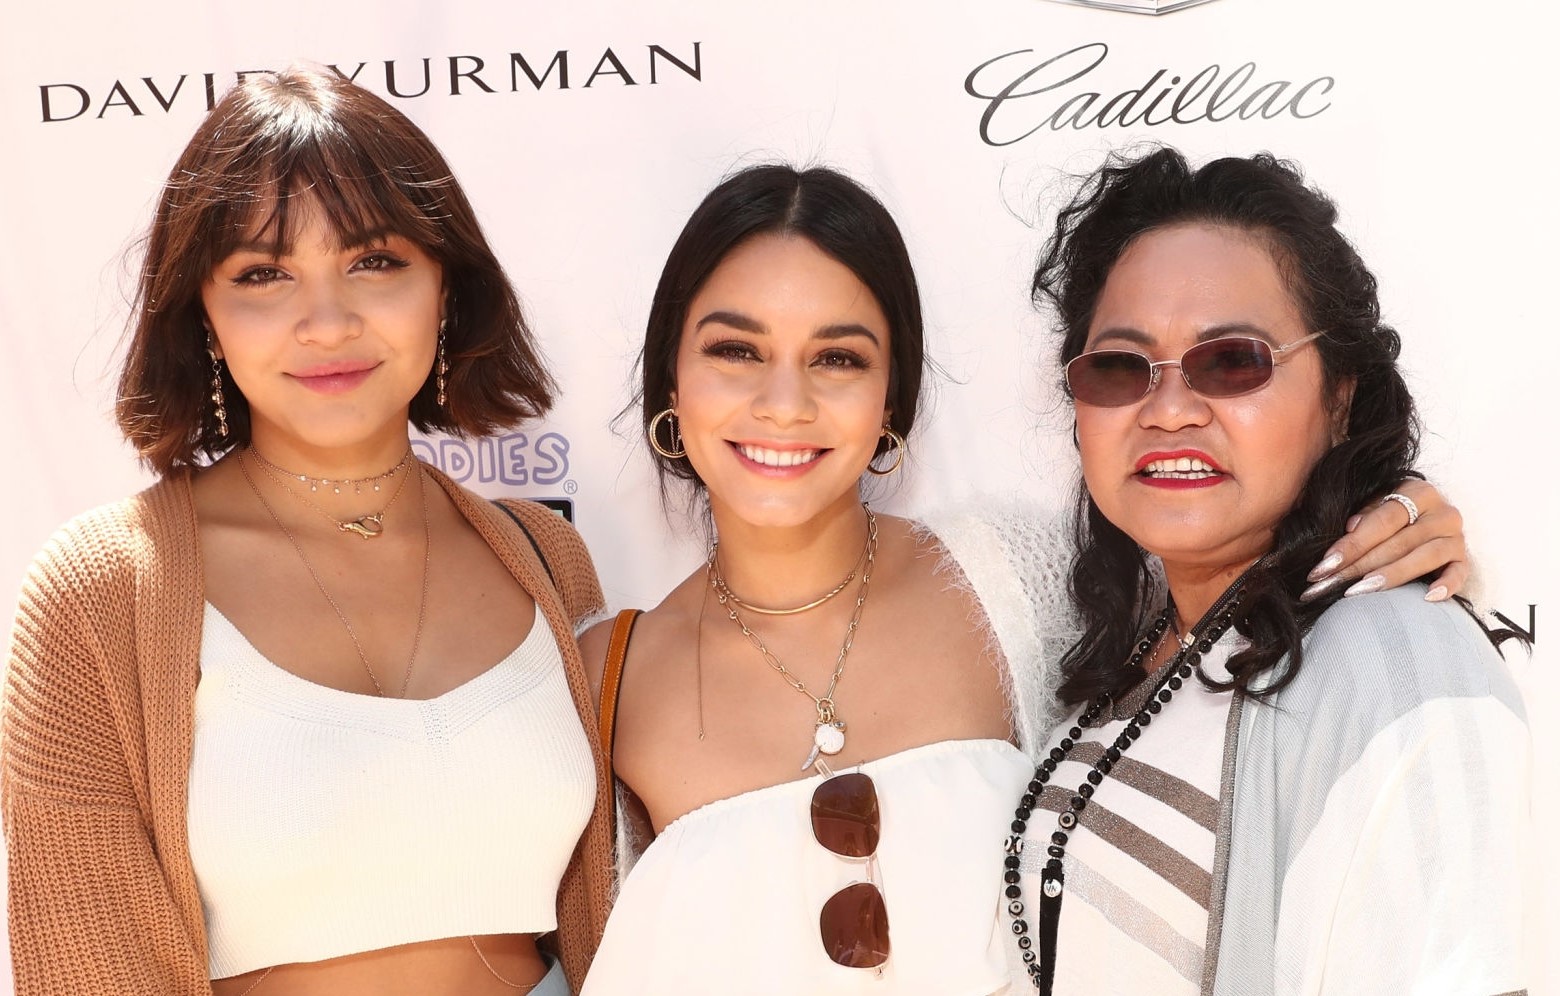 Gina with her two daughters, Vanessa and Stella, attending an award show.